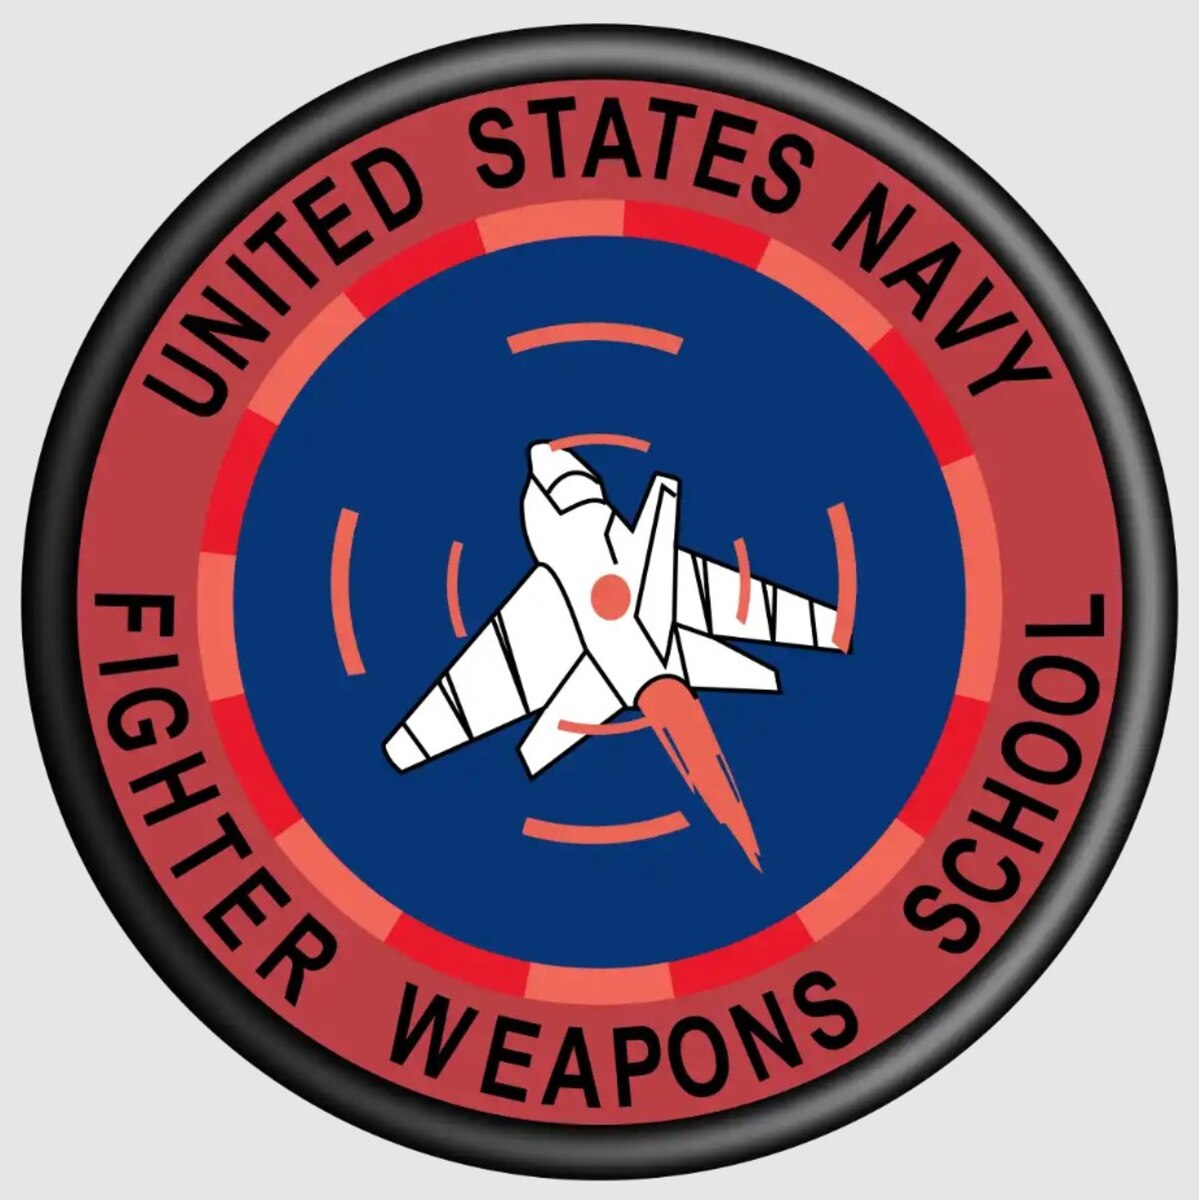 Red and blue logo with a white plane in the middle